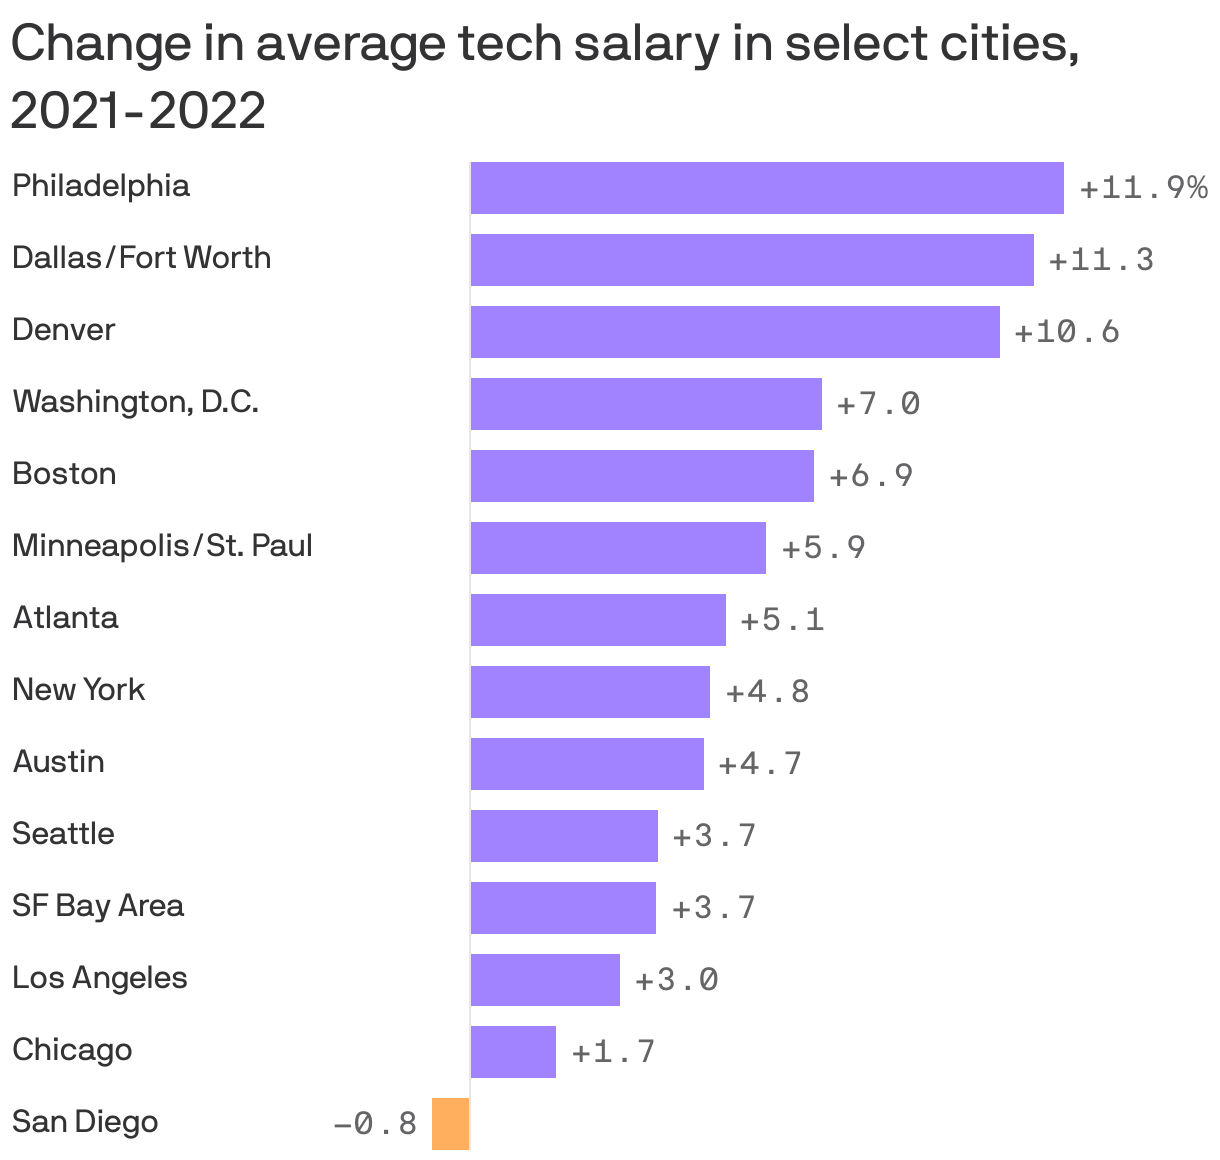 Change in average tech salary in select cities, 2021-2022